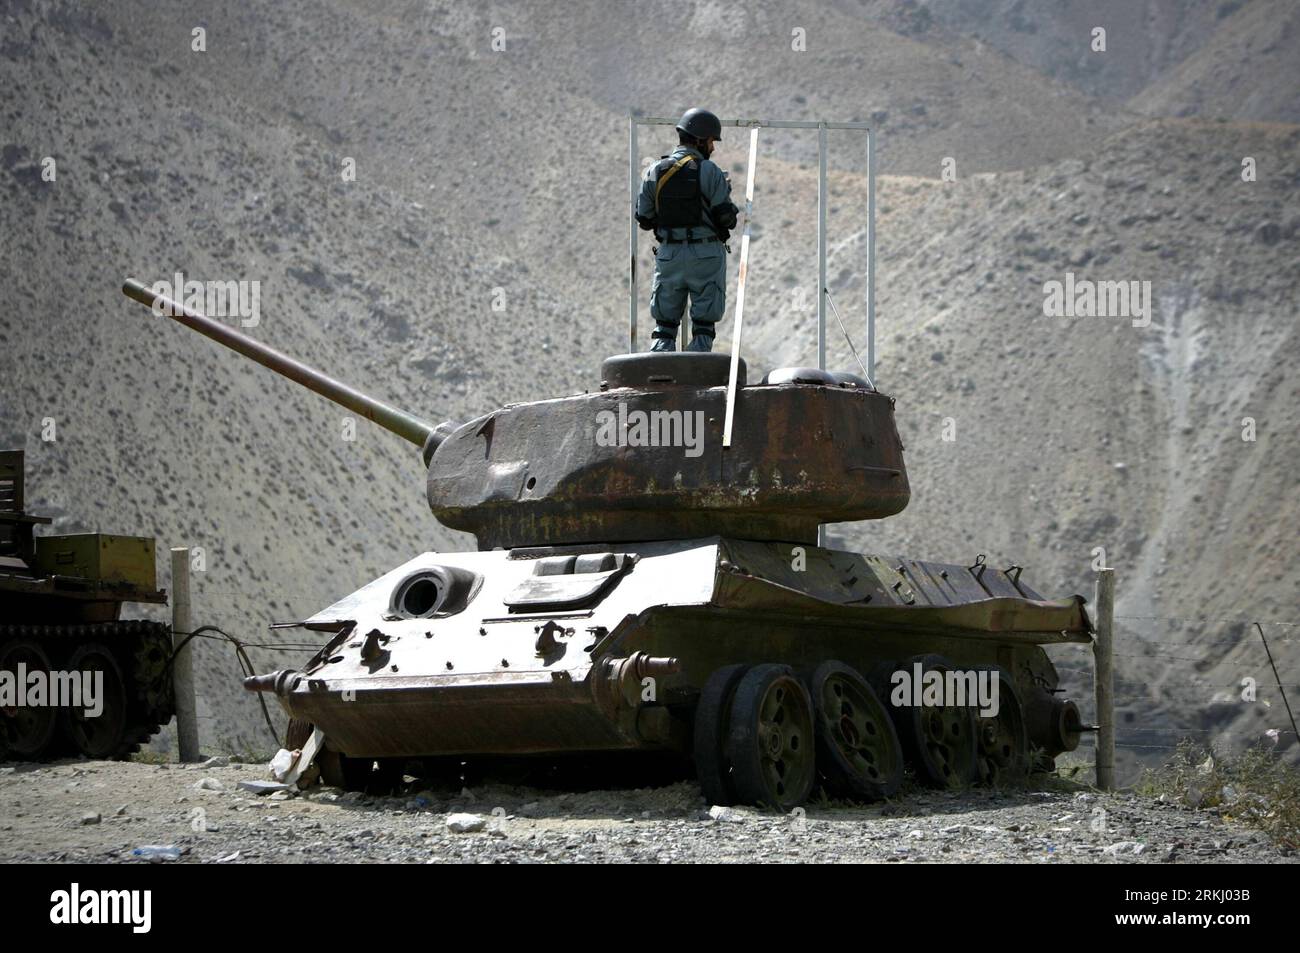 Bildnummer: 55935324  Datum: 10.09.2011  Copyright: imago/Xinhua (110910) -- PANJSHIR, Sept. 10, 2011 (Xinhua) -- An Afghan national police stands guard on a destroyed military tank close to the grave of Ahmad Shah Massoud in Panjshir Province, Afghanistan, Sept. 10, 2011. Anti-Taliban leader and commander of Northern Alliance Ahmad Shah Massoud was assassinated in a suicide attack by some Arabs pretending to be journalists on September 9, 2001, and two days later the September 11 attacks on the United States happened. (Xinhua/Ahmad Massoud)(wjd) AFGHANISTAN-AHMAD SHAH MASSOUD-DEATH-10TH ANNIV Stock Photo